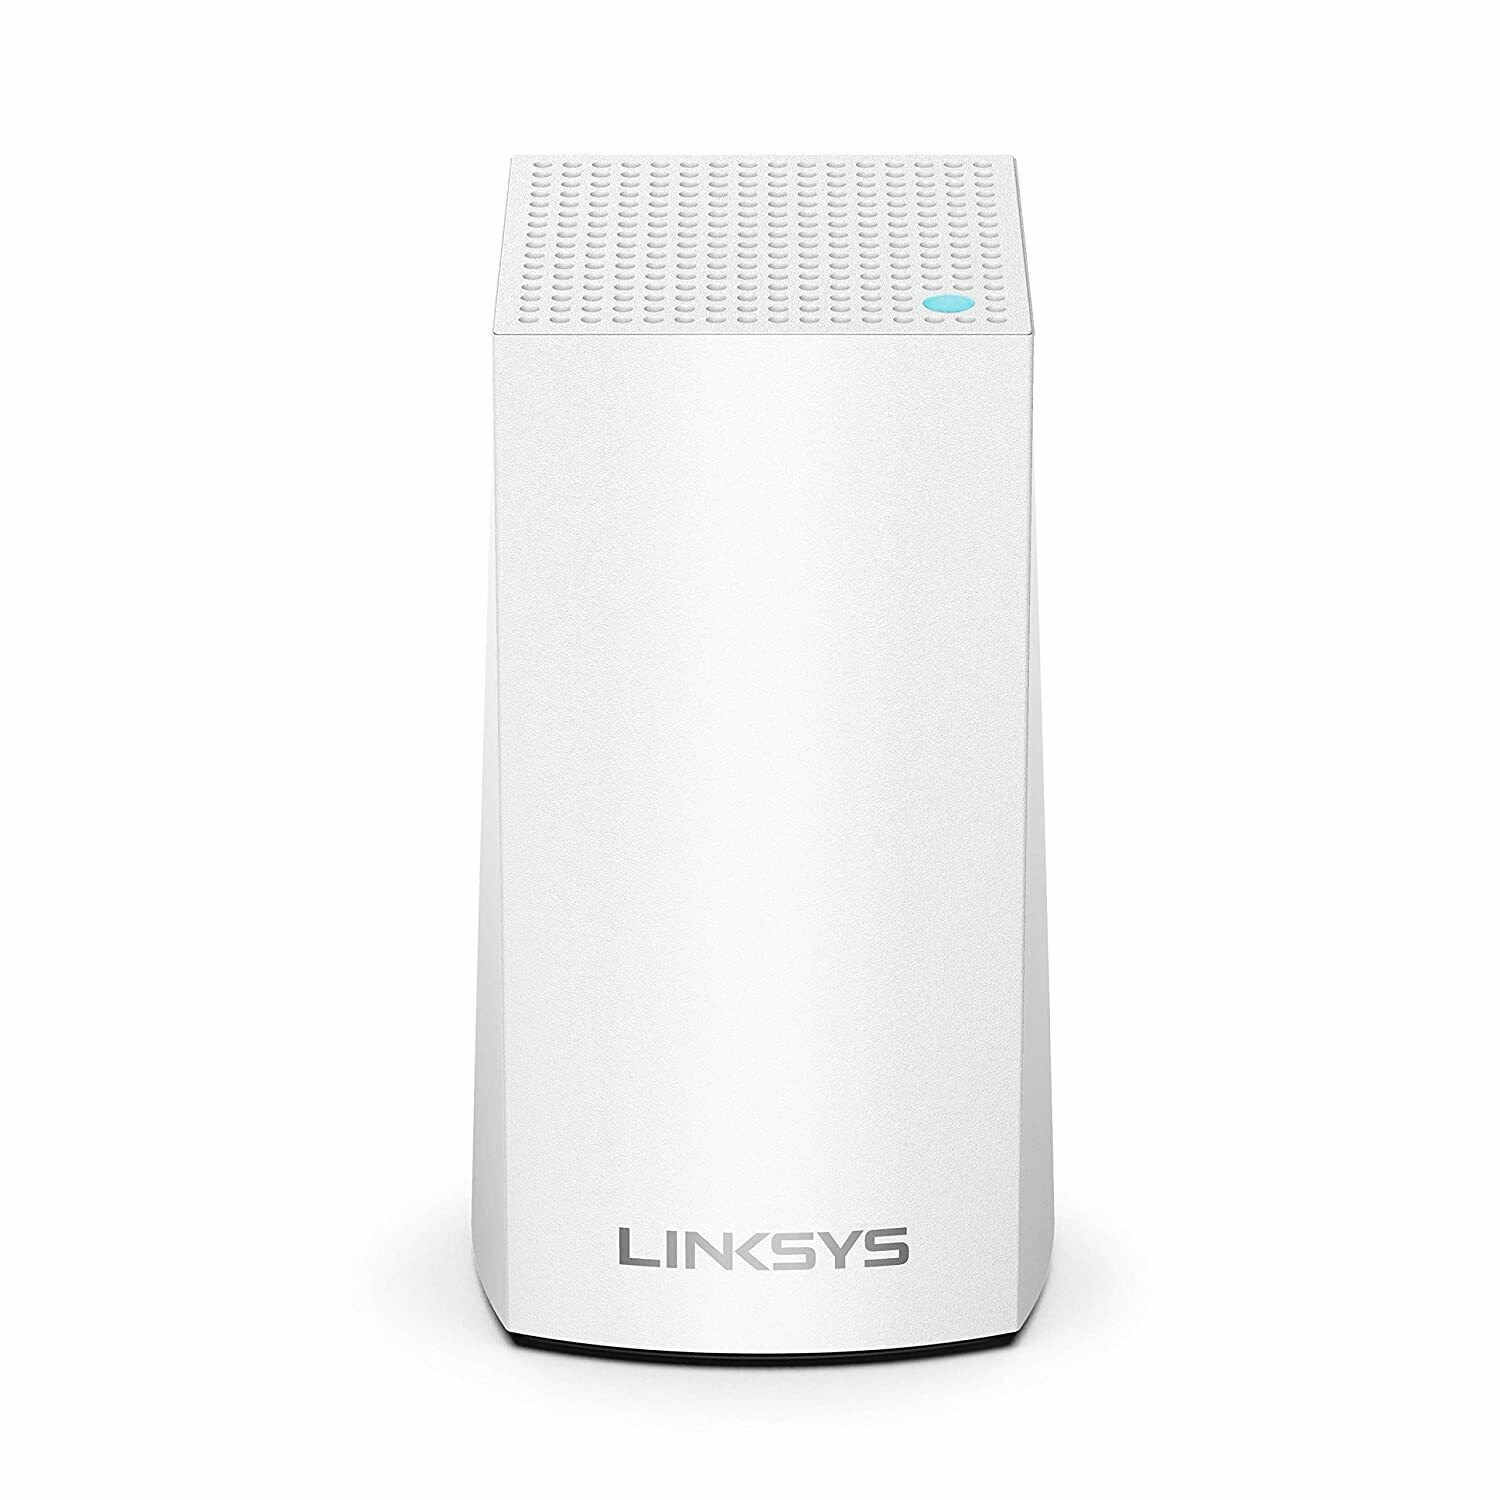 Linksys WHW0101 AC 1300 Dual Band